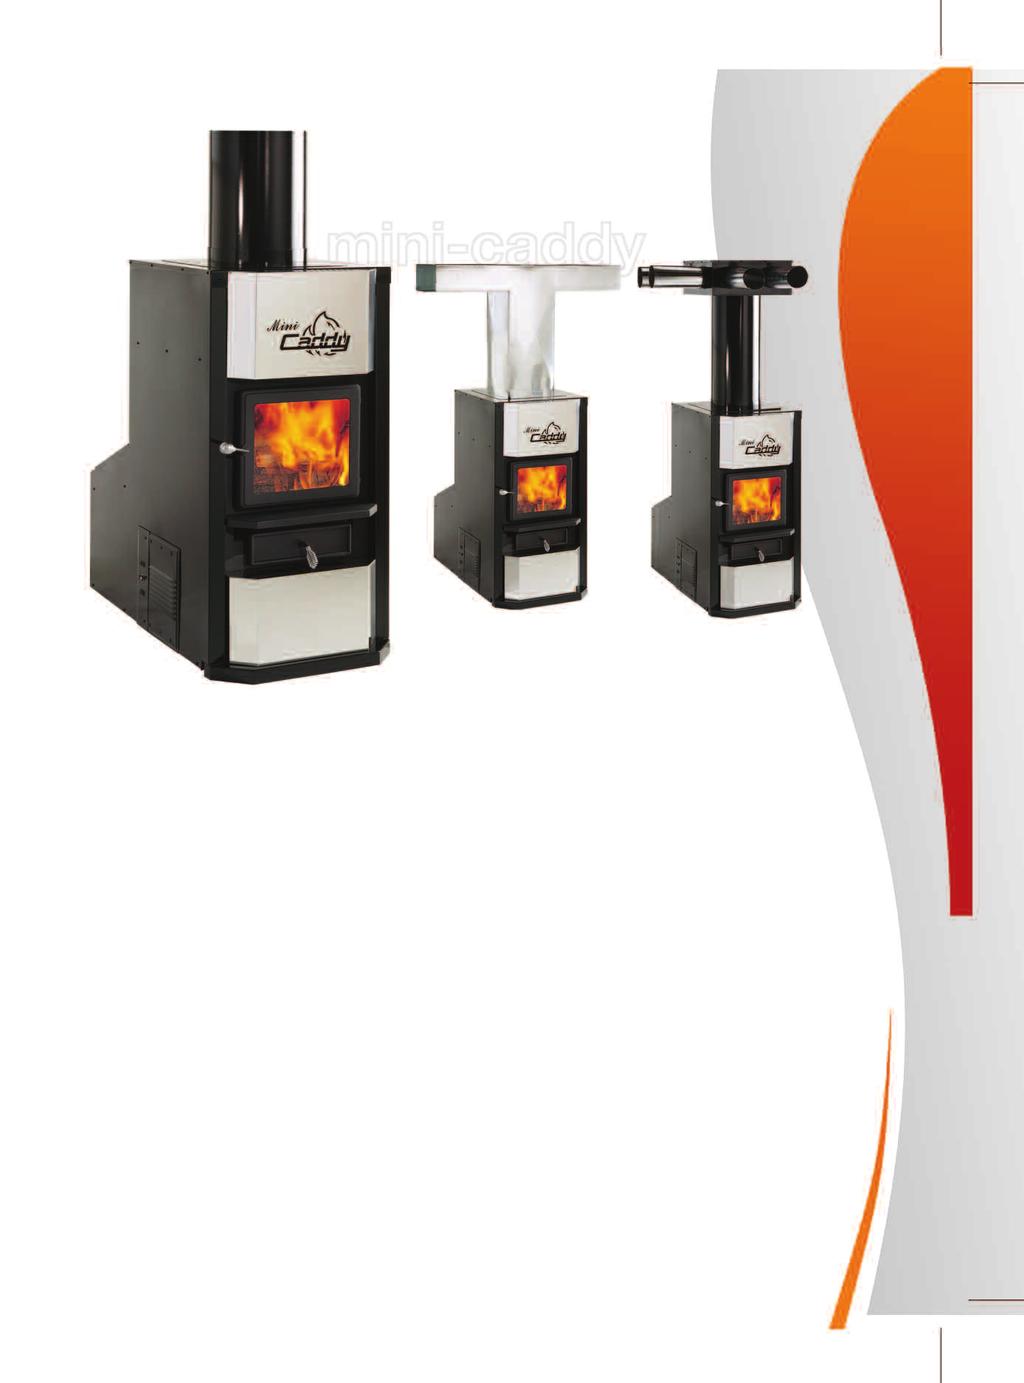 Wood and combination furnace 5 Wood and combination furnace mini-caddy furnace and components MINI-CADDY 75,000 BTU (21.